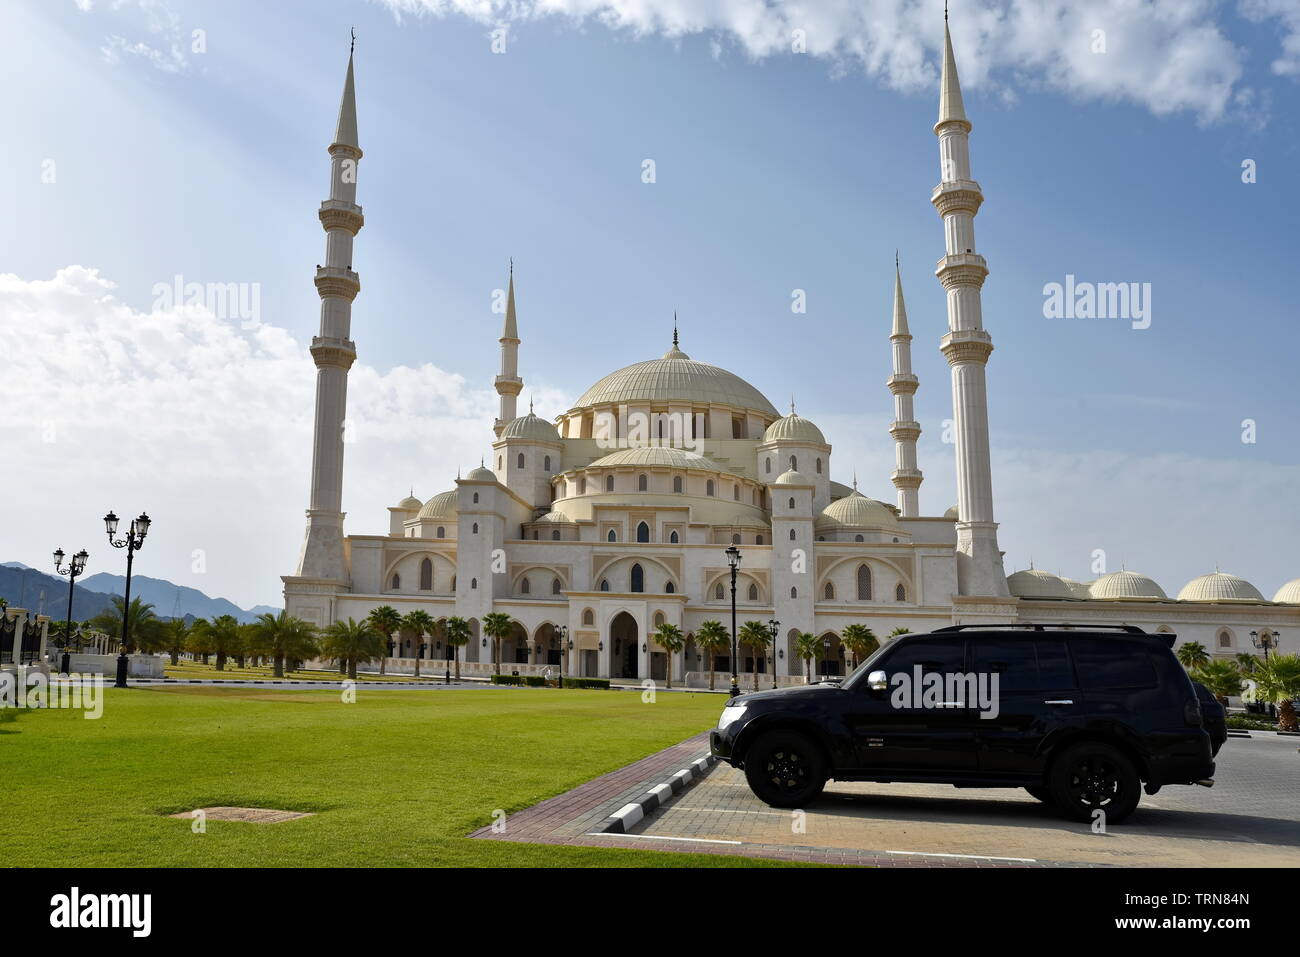 Grand Sheikh Zayed Mosque, Fujairah, United Arab Emirates, June 4, 2019. Black Mitsubishi Pajero and the view of the mosque in the day Stock Photo